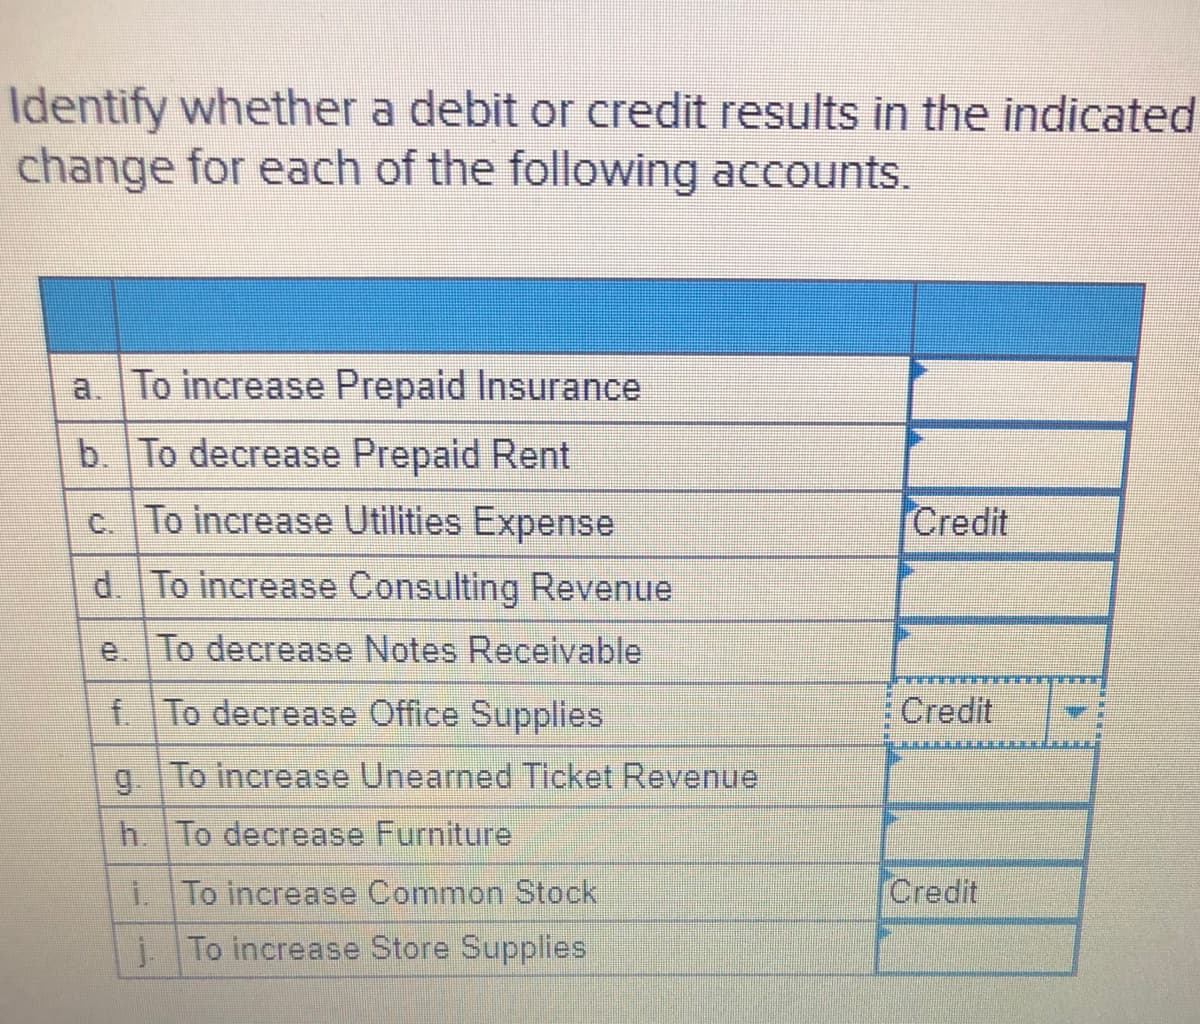 Identify whether a debit or credit results in the indicatec
change for each of the following accounts.
To increase Prepaid Insurance
b. To decrease Prepaid Rent
c. To increase Utilities Expense
Credit
d. To increase Consulting Revenue
e. To decrease Notes Receivable
f. To decrease Office Supplies
Credit
g. To increase Unearned Ticket Revenue
h. To decrease Furniture
i. To increase Common Stock
Credit
i To increase Store Supplies
